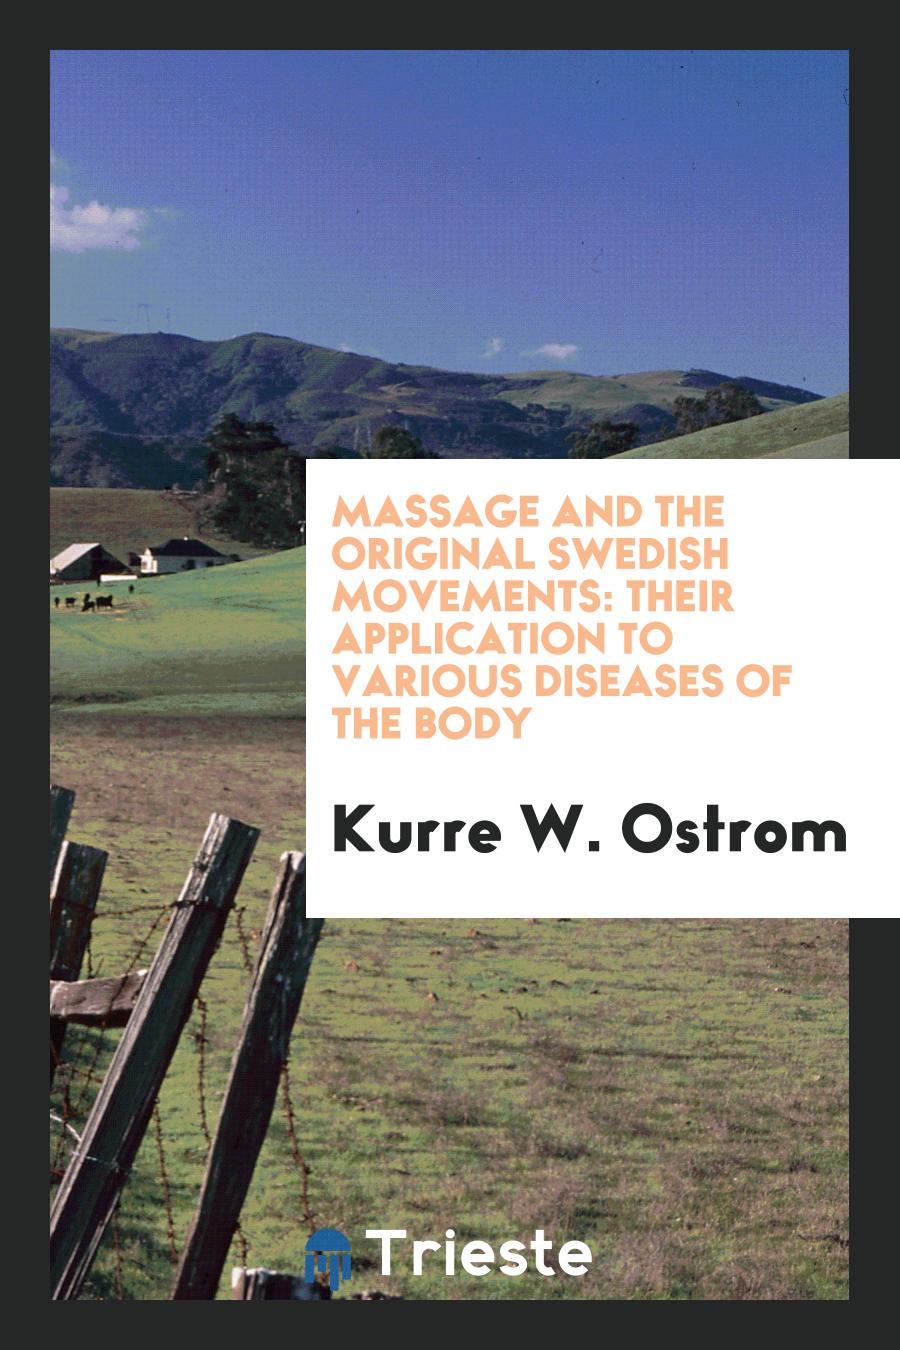 Massage and the Original Swedish Movements: Their Application to Various Diseases of the Body